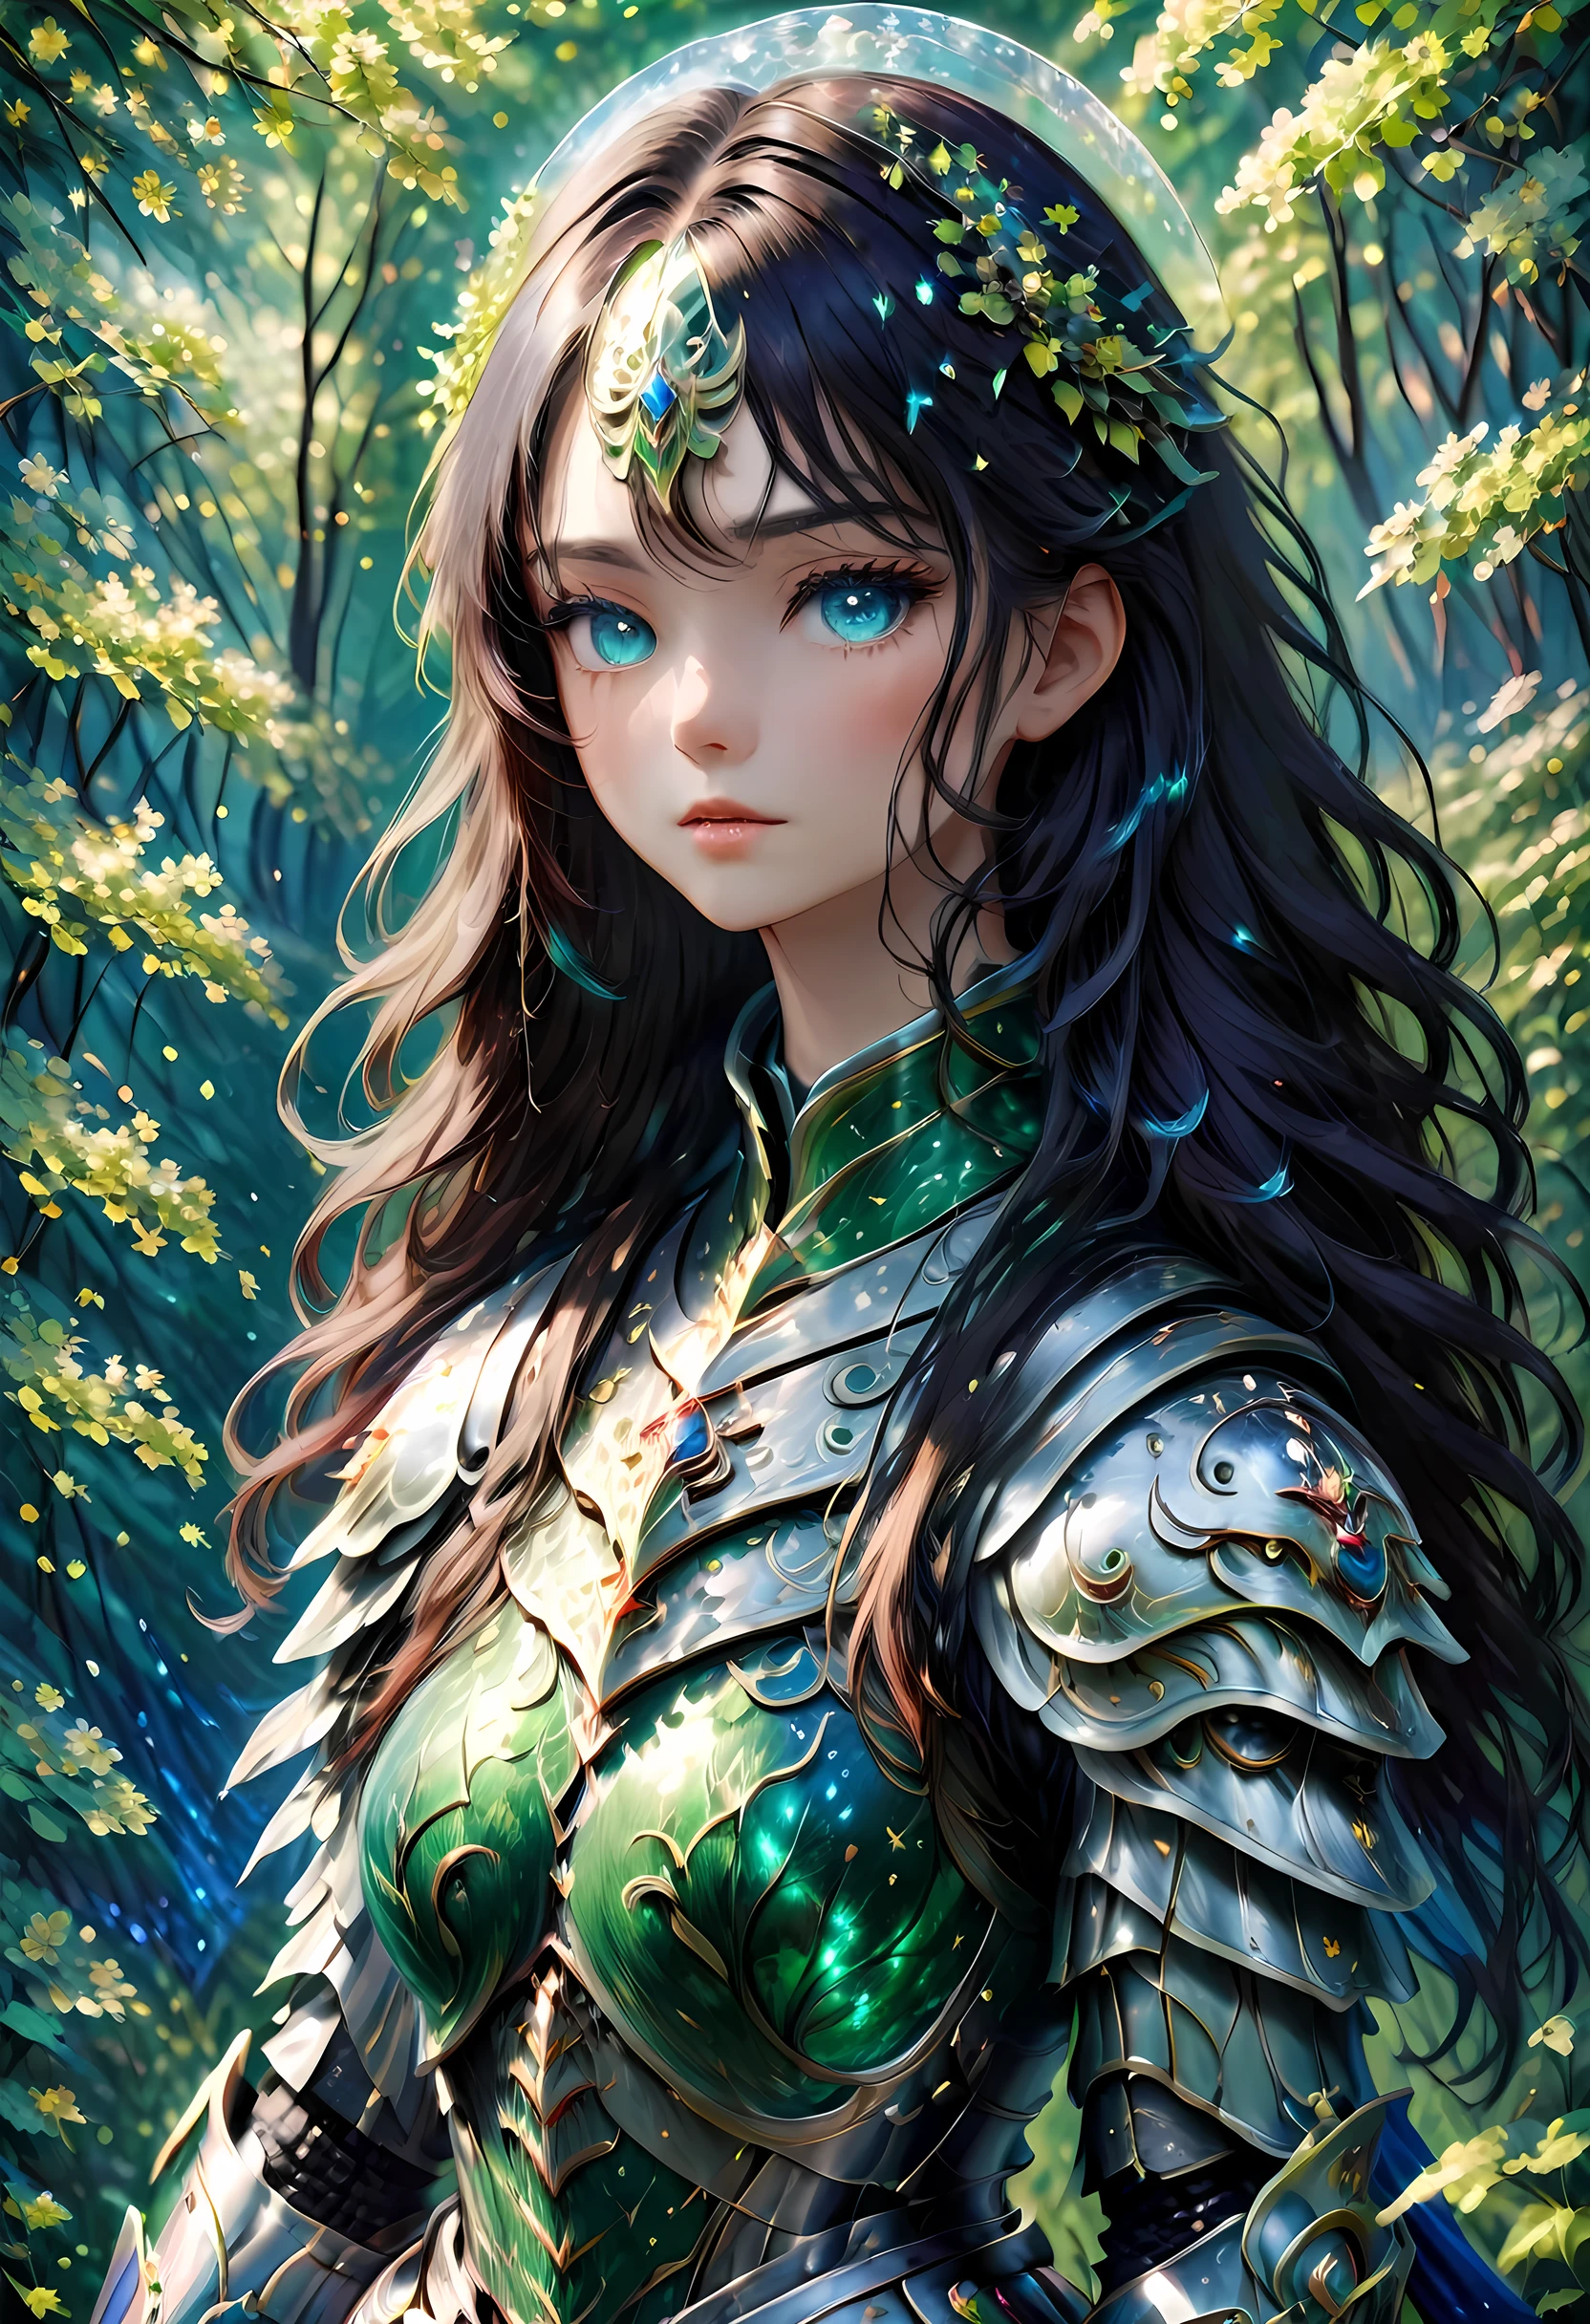 (Claude Monet Style:1.5) modisn disney, Claude_Monet style painting, a picture of woman paladin of nature protecting the forest, a woman knight, black hair, long hair, full body (best details, Masterpiece, best quality :1.5), ultra detailed face (best details, Masterpiece, best quality :1.5), ultra feminine (best details, Masterpiece, best quality :1.5), black hair, long hair, braided hair, pale skin, (deep blue: 1.2) eyes, intense eyes, wearying heavy armor, white armor (best details, Masterpiece, best quality :1.5), green cloak, armed with a sword, glowing sword GlowingRunes_green, fantasy forest background, D&D art, RPG art, magical atmosphere magic-fantasy-forest, ultra best realistic, best details, best quality, 16k, [ultra detailed], masterpiece, best quality, (extremely detailed), ultra wide shot, photorealism, depth of field, hyper realistic painting, cybrk, RagingNebula
